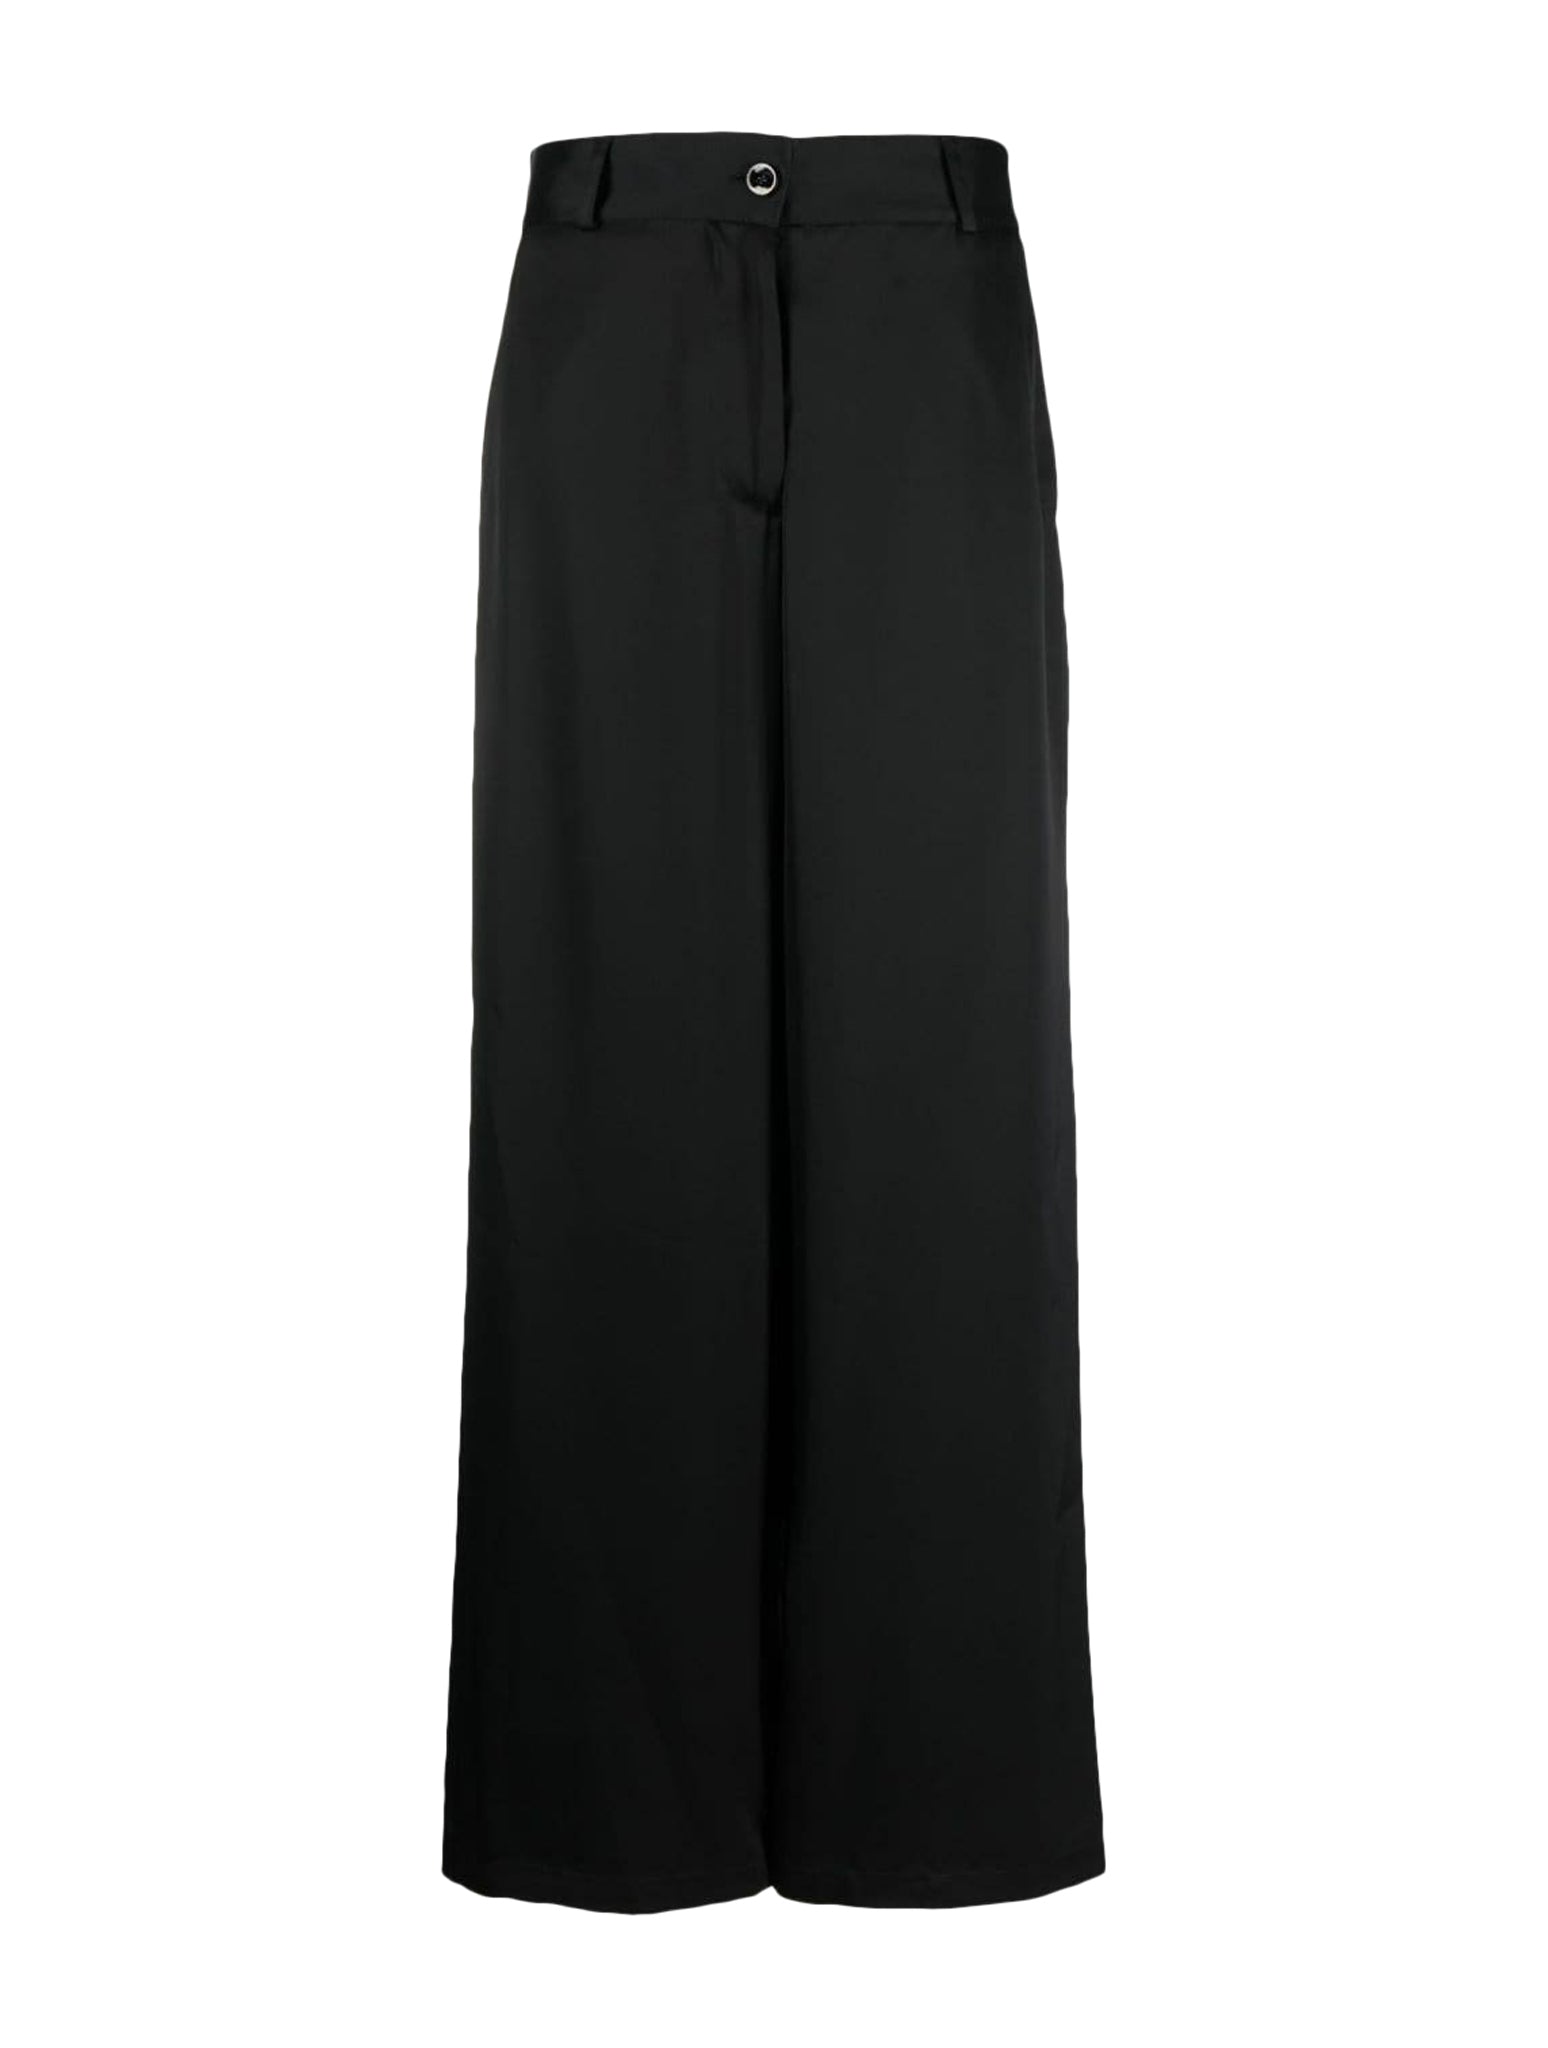 SLIGHTLY LOW WAIST RELAXED FIT TROUSER WITH SIDE SEAM POCKETS